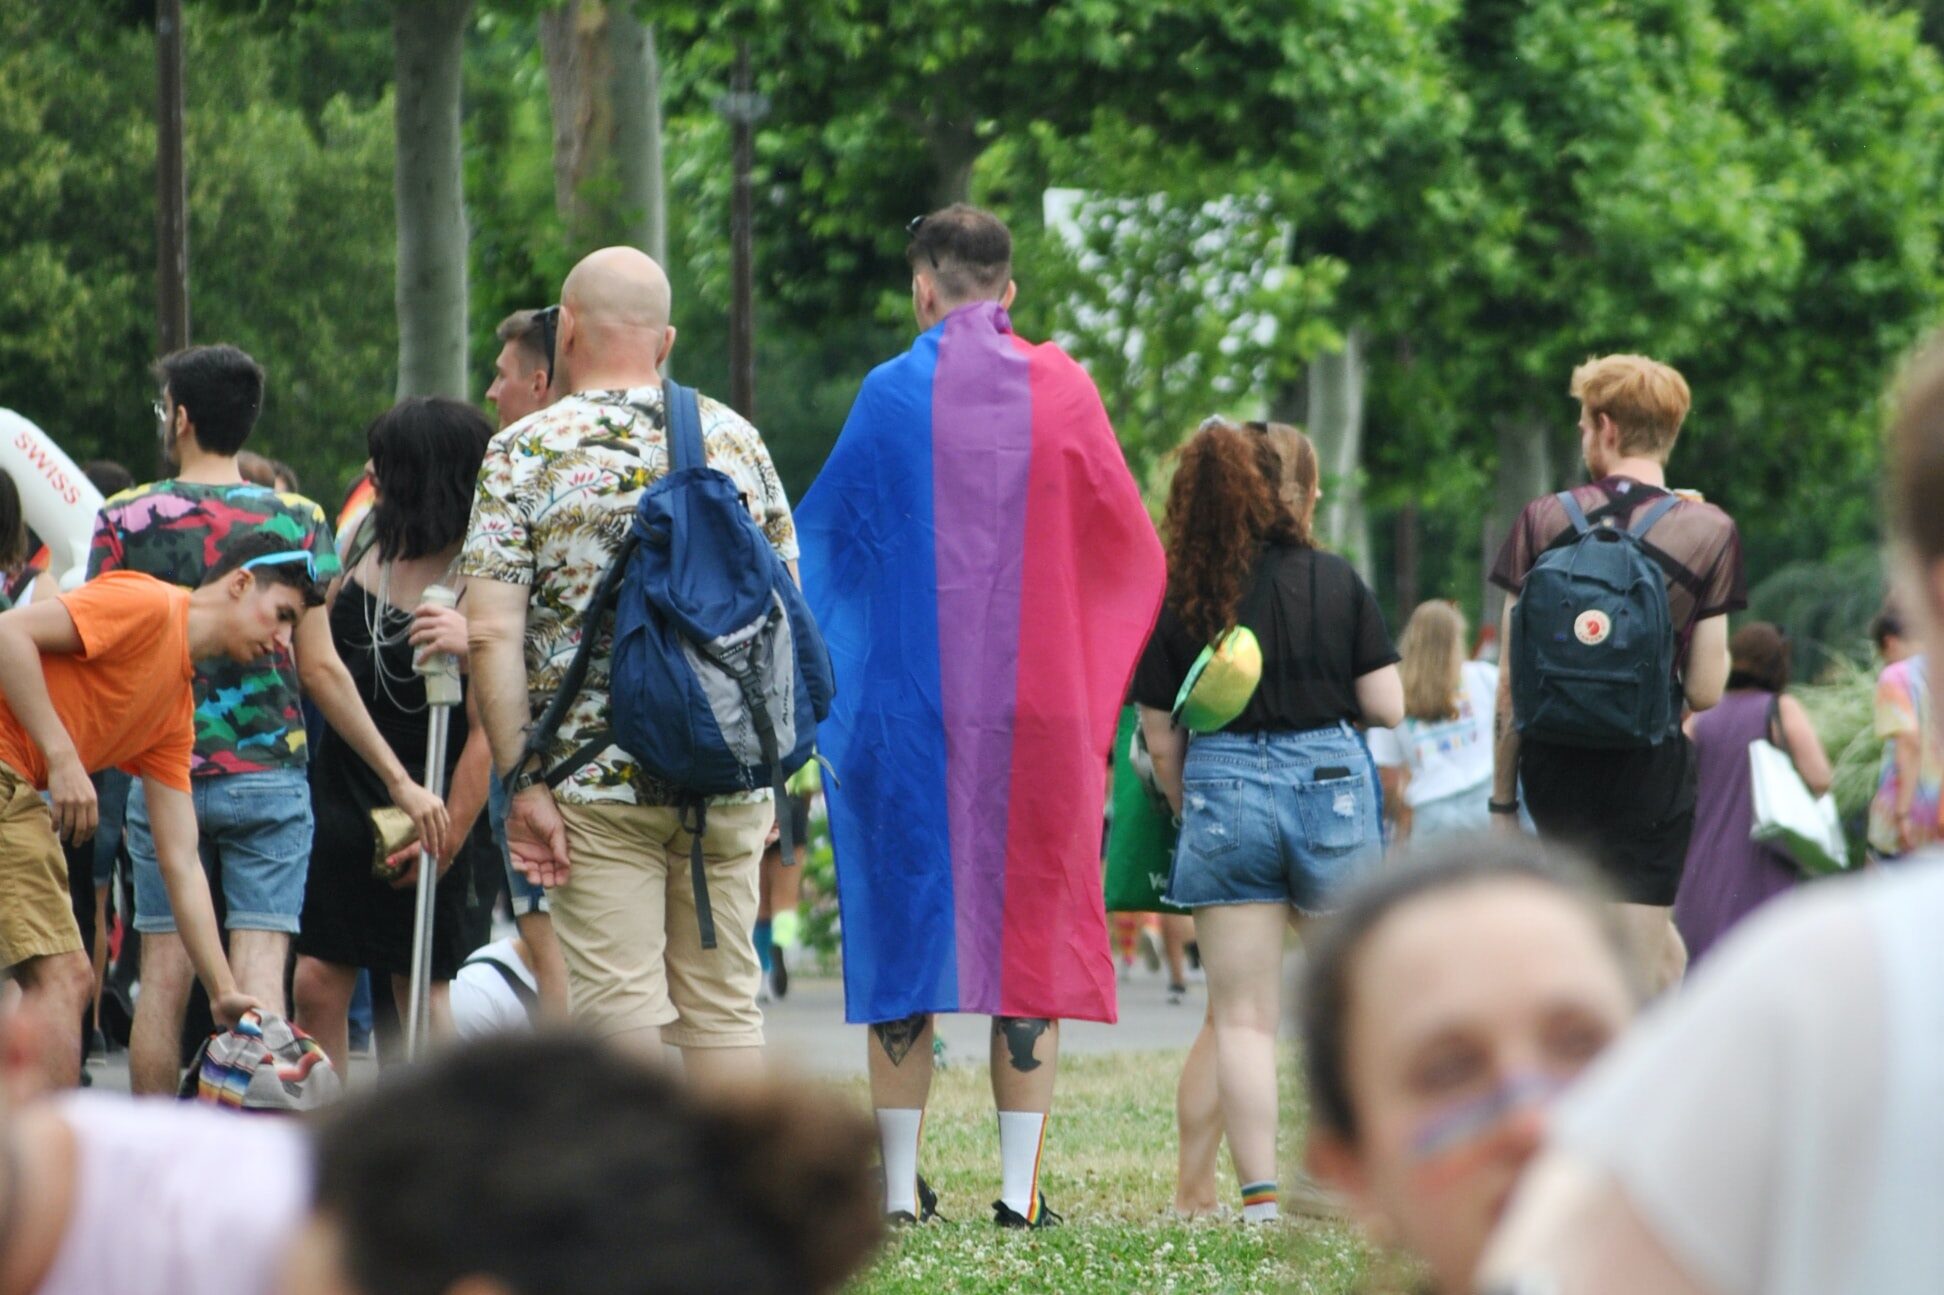 Two masculine people stand in a crowd facing away from the camera. One of them wears a bisexual pride flag as a cape.